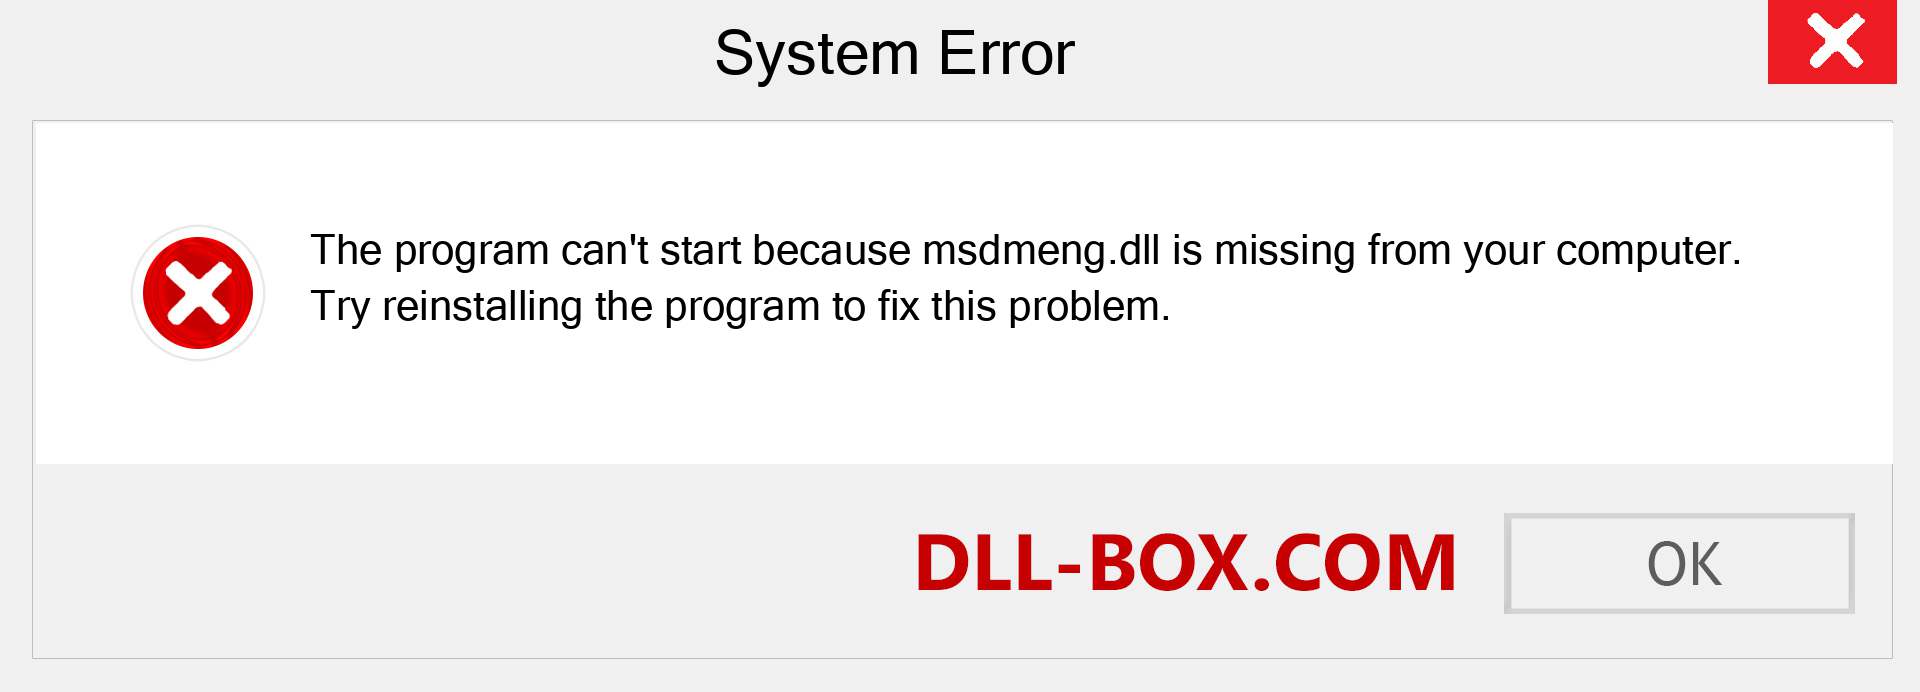  msdmeng.dll file is missing?. Download for Windows 7, 8, 10 - Fix  msdmeng dll Missing Error on Windows, photos, images